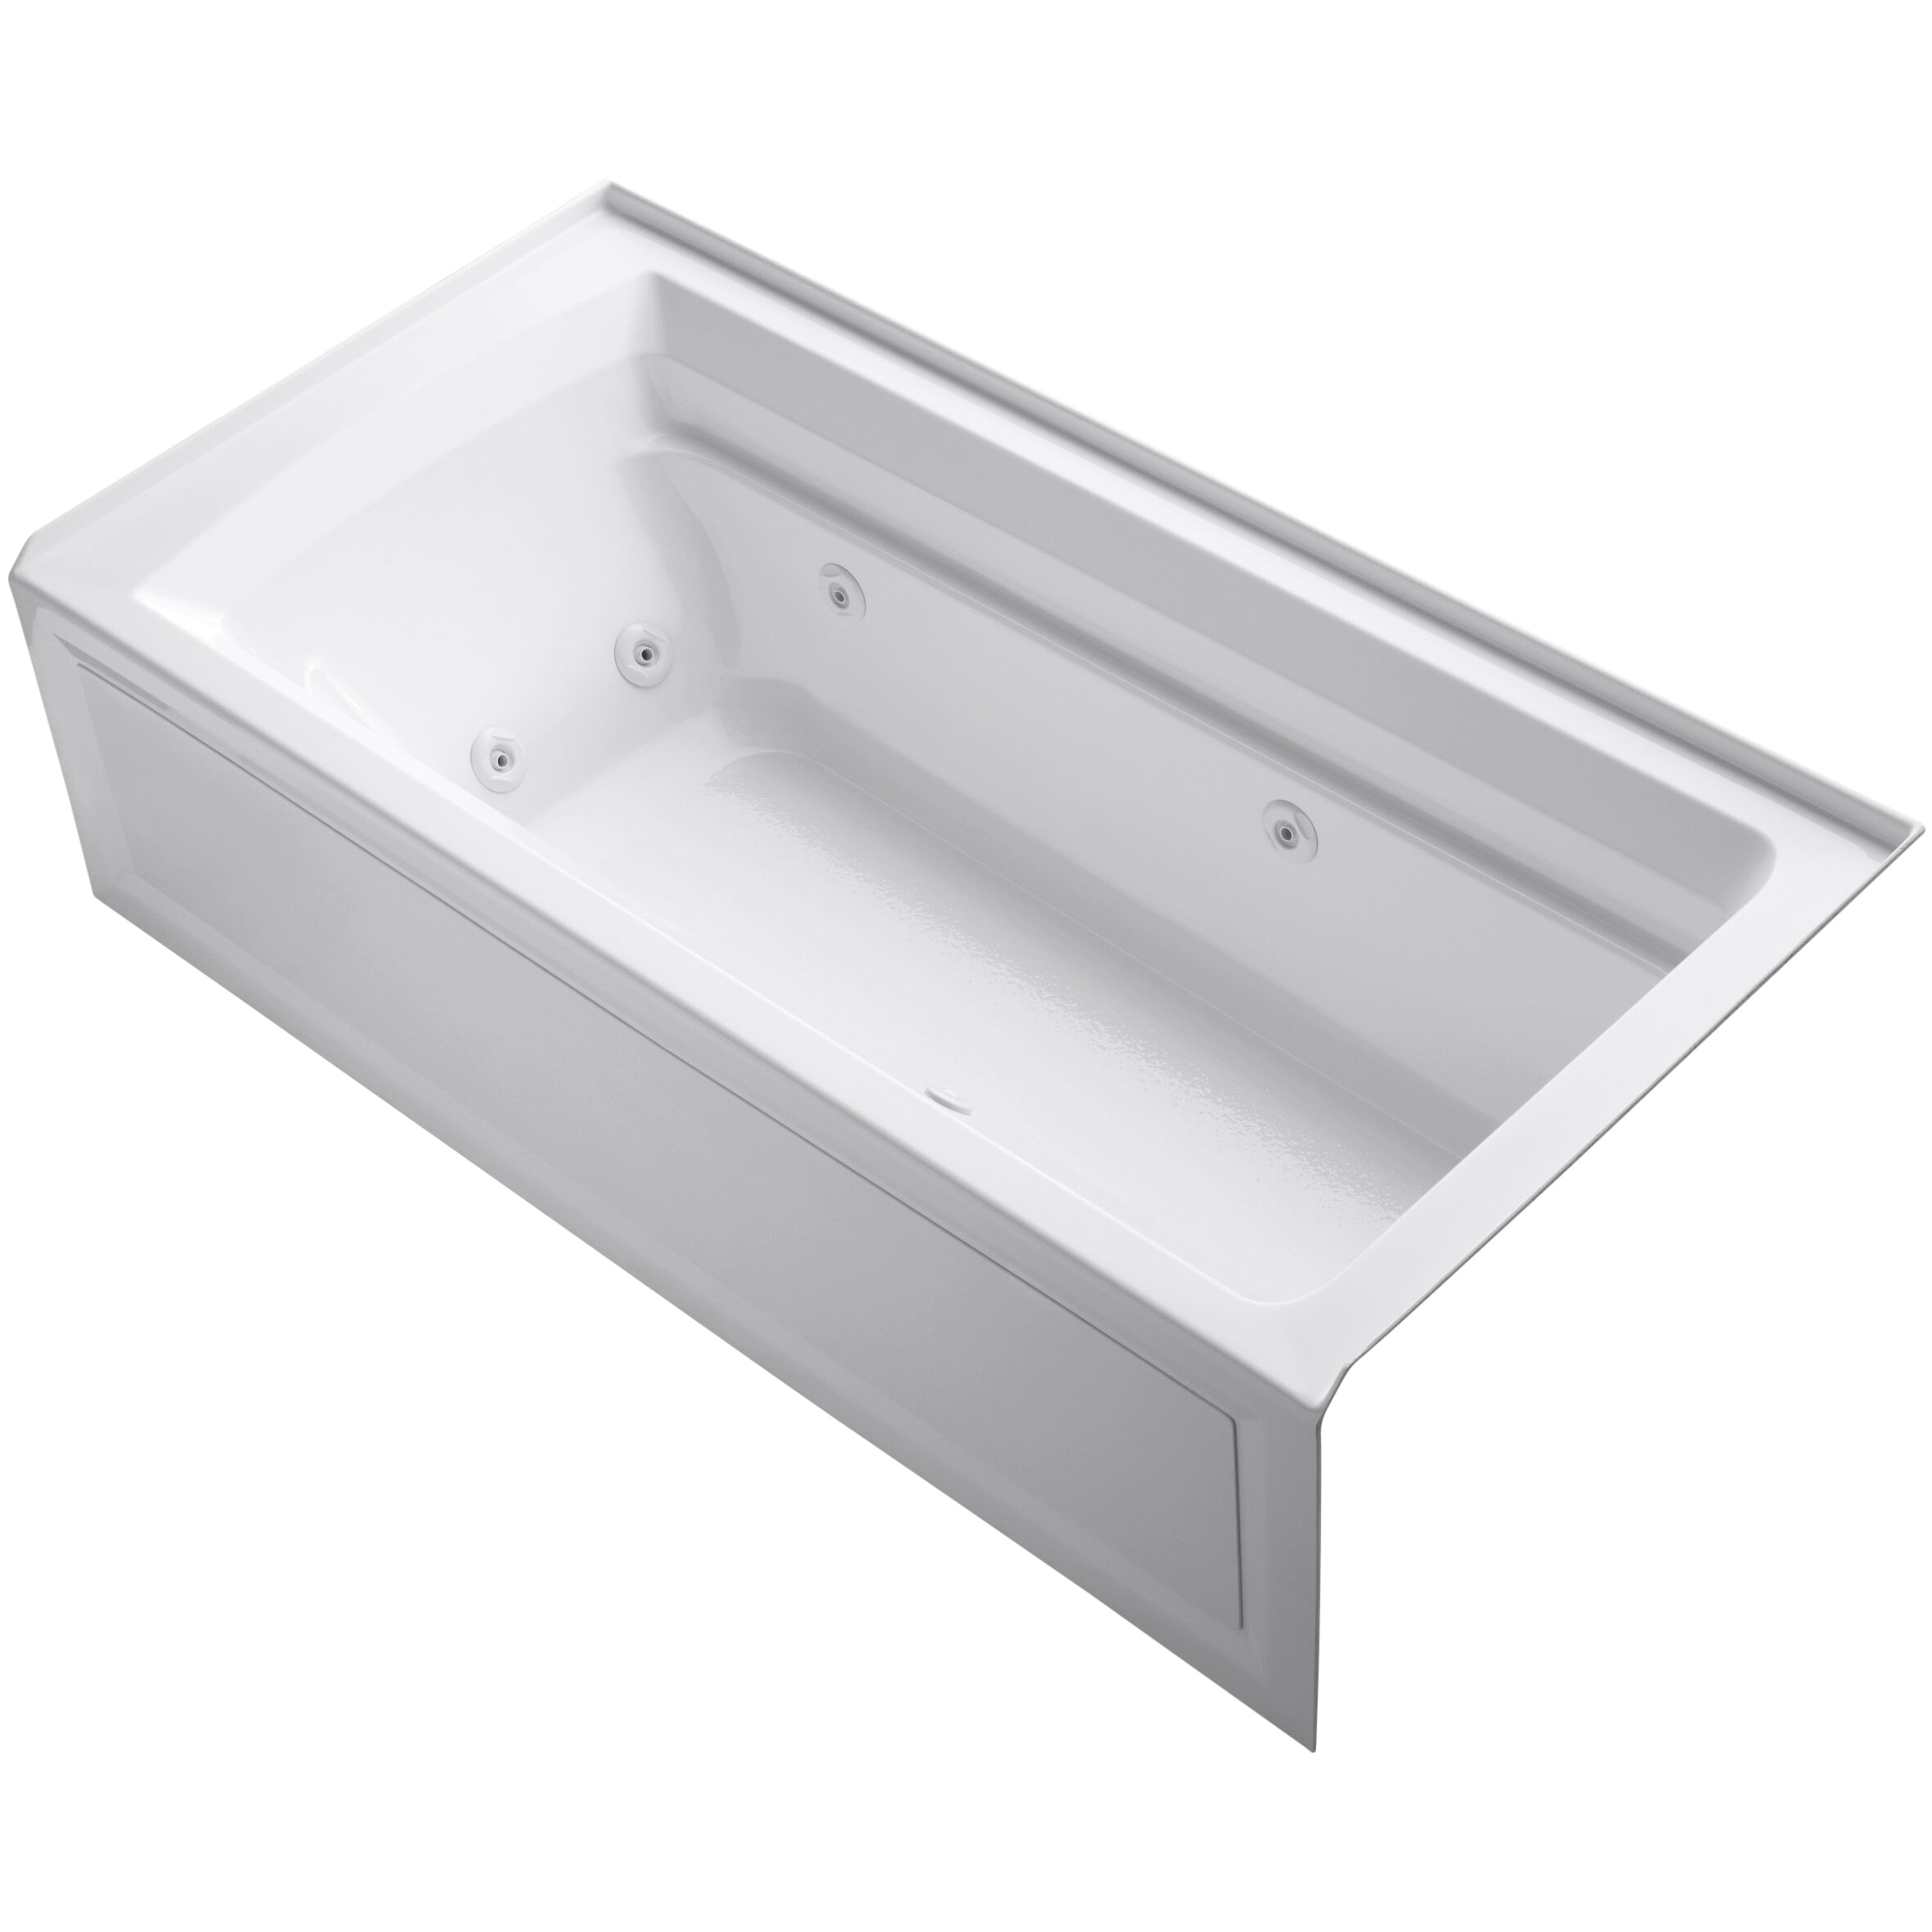 Kohler Archer Collection 72 Three Wall Alcove Jetted Whirlpool Apron Front Bath Tub with Right Side Drain 1124 RA KOH